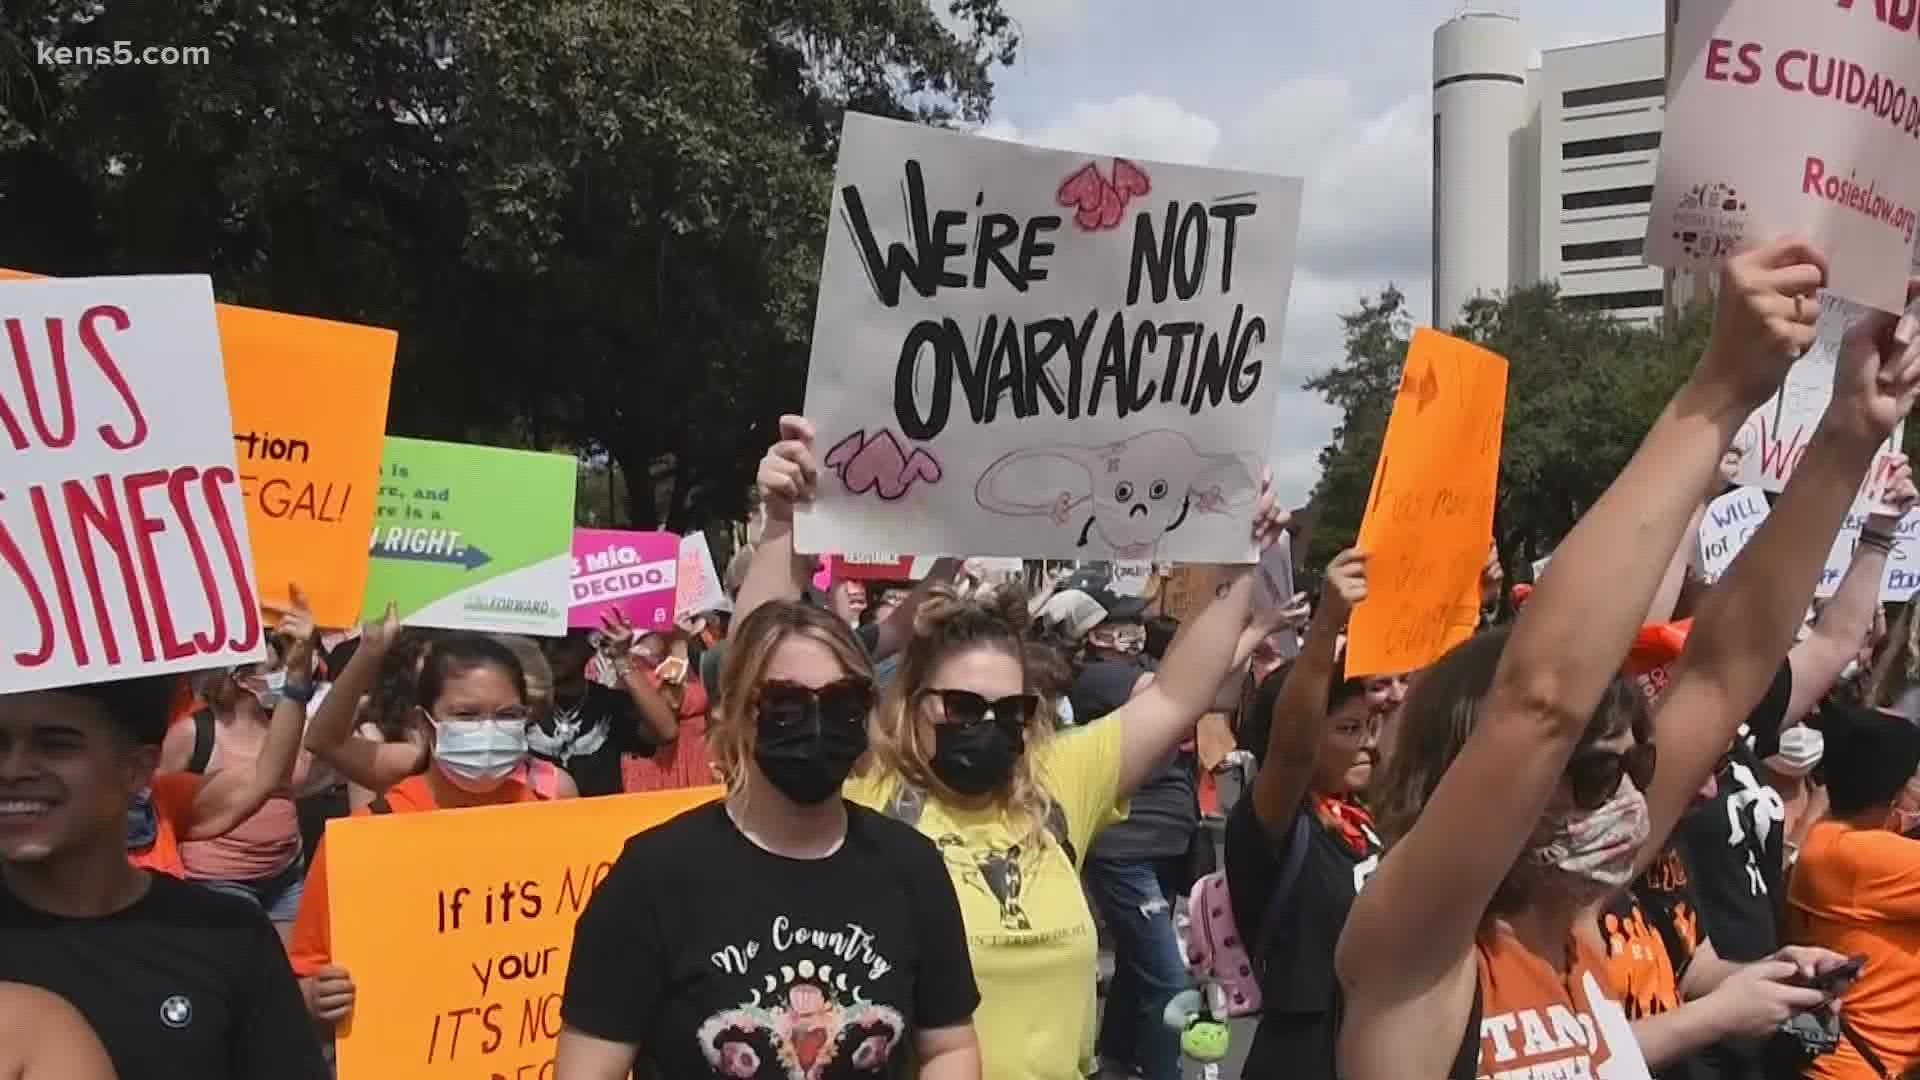 The nationwide demonstrations come as the U.S. Supreme Court prepares to hear high-profile cases which could shape the future of reproductive rights.